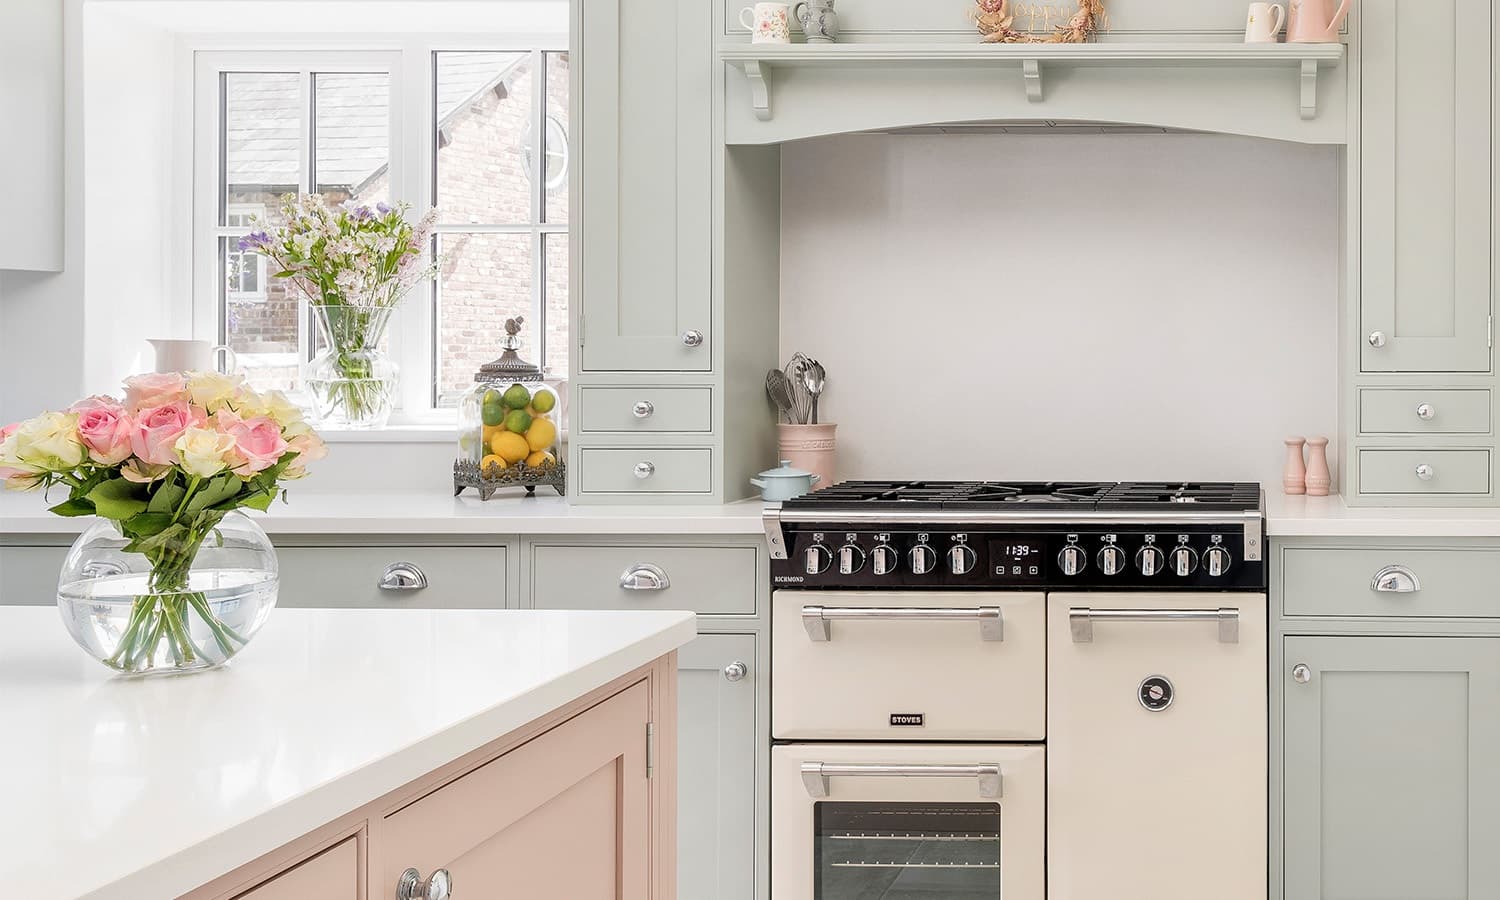 How to bring Spring into your kitchen